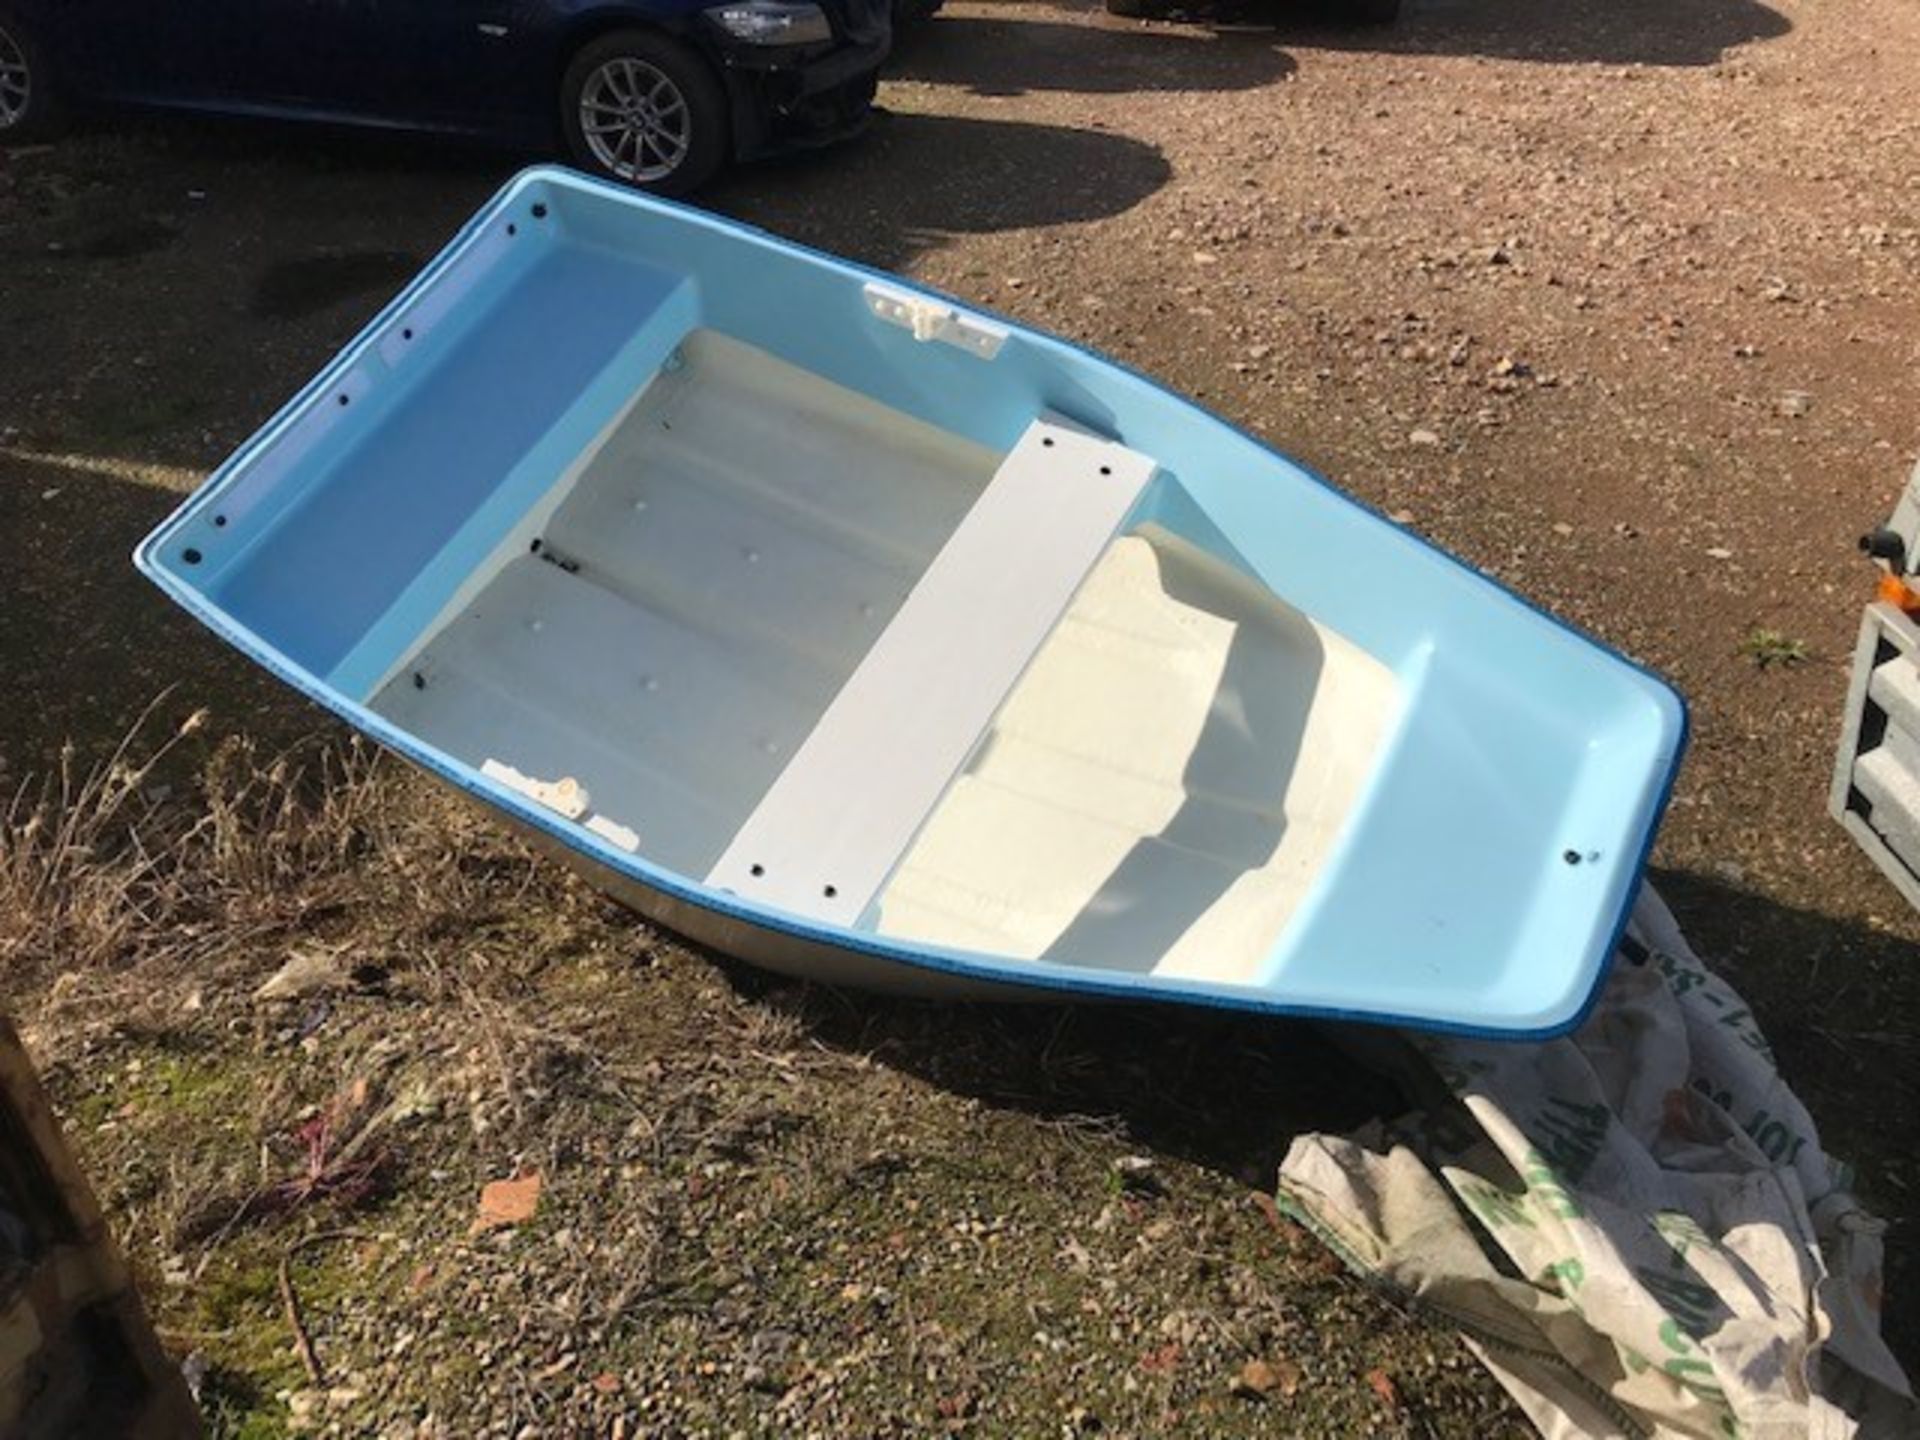 fiberglass dinghy with demountable keel and transport wheels